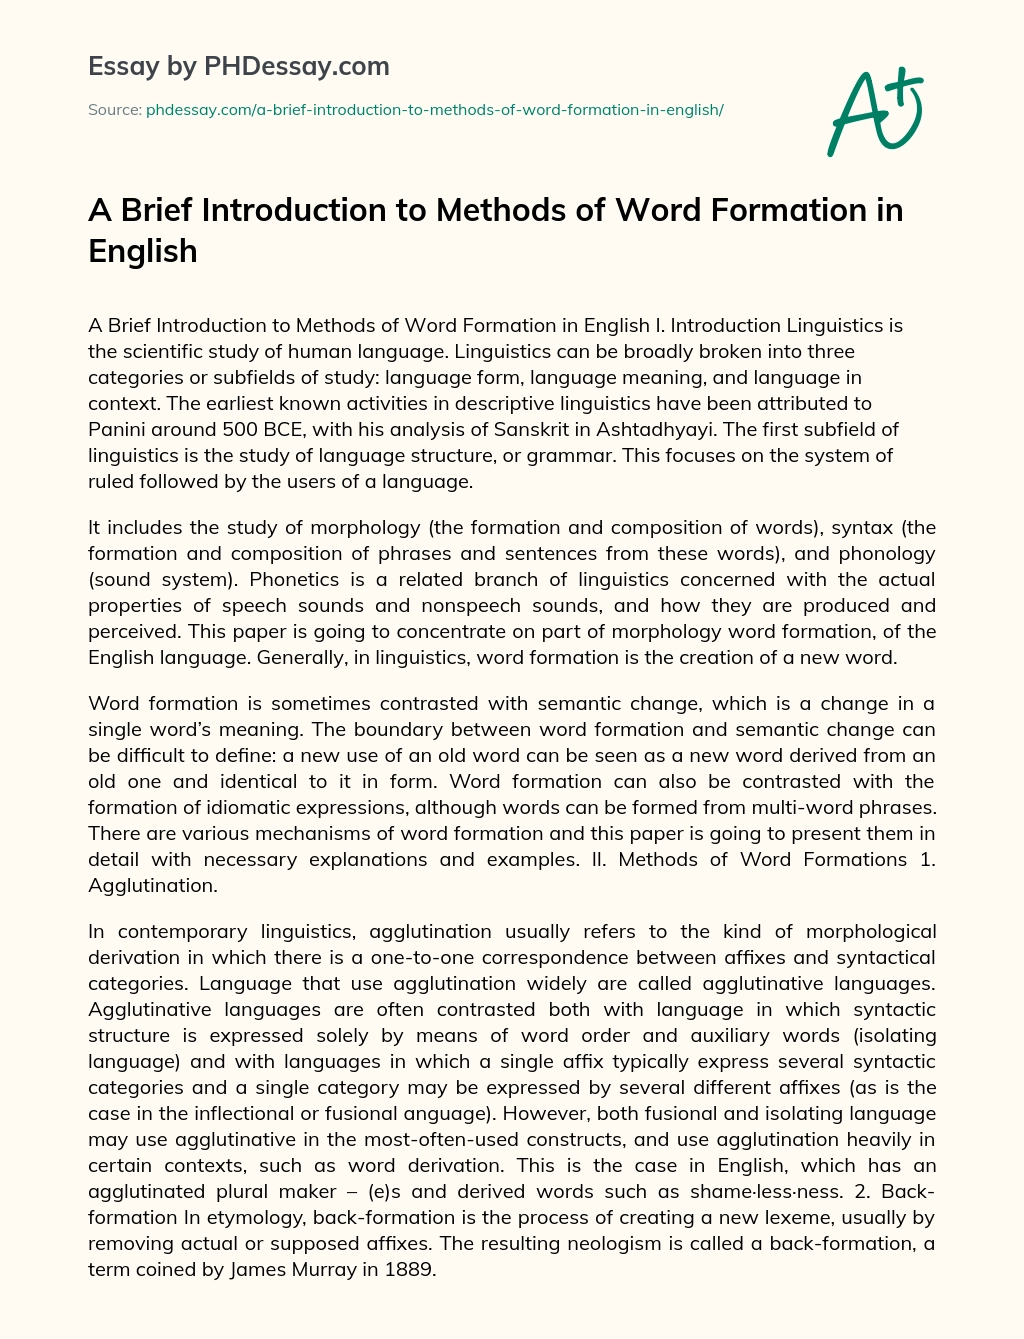 A Brief Introduction to Methods of Word Formation in English essay